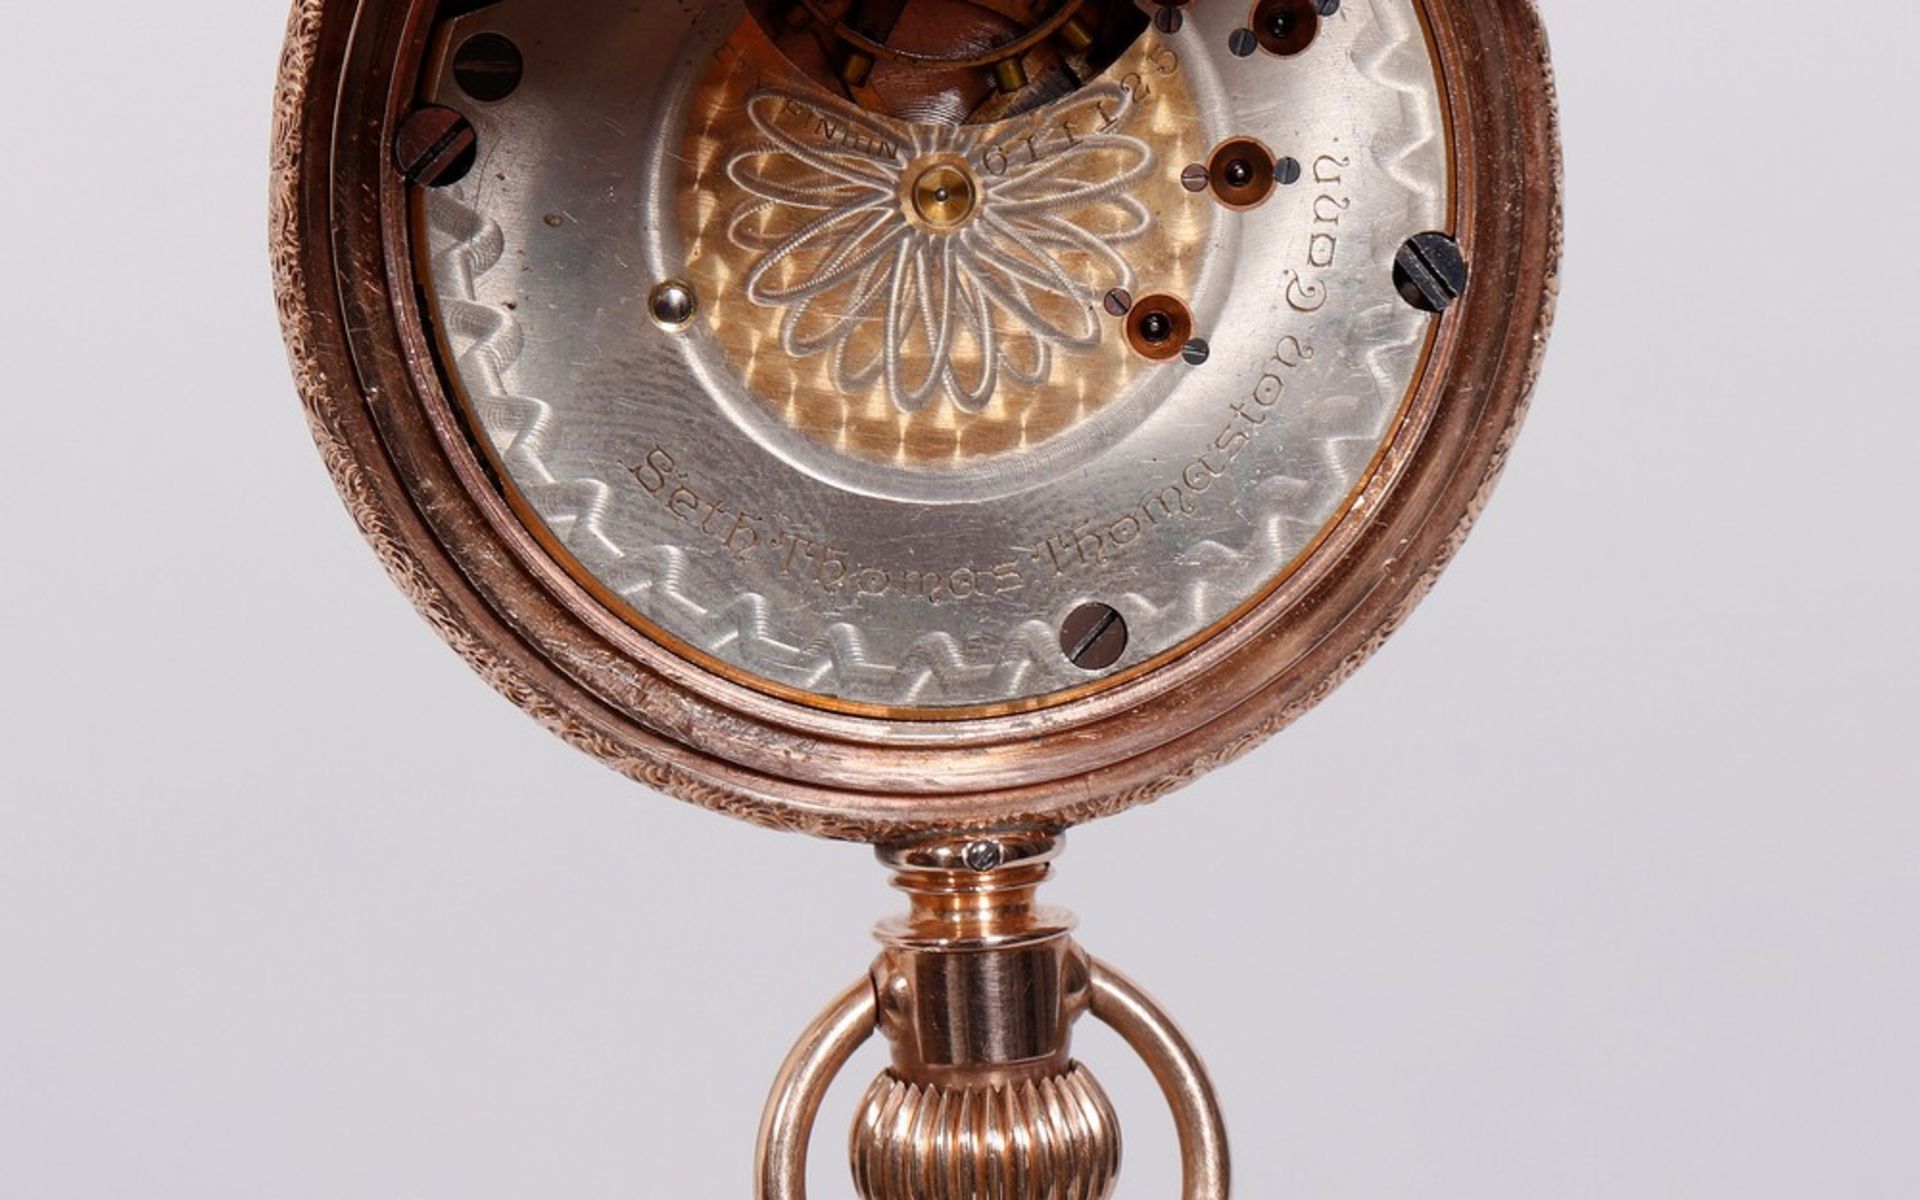 Very rare American pocket watch from 1894, Seth Thomas, Thomaston, Conn., made of 585 gold - Image 7 of 8